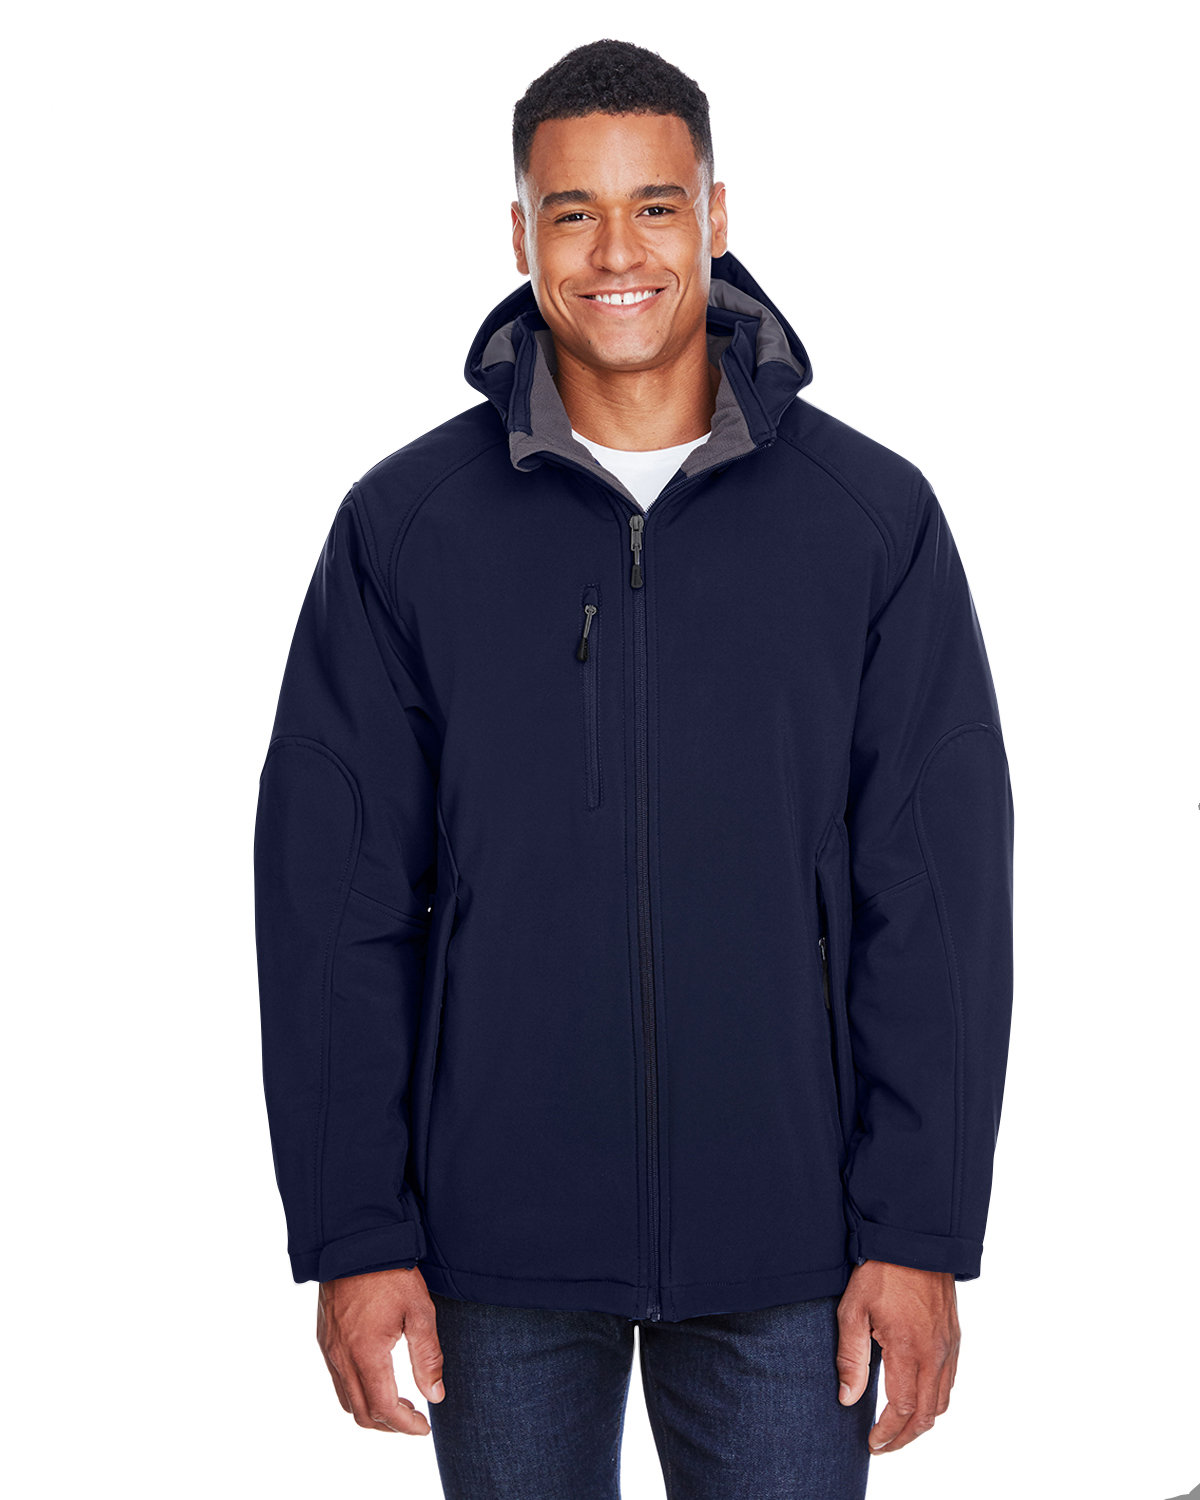 North End Men's Glacier Insulated Three-Layer Fleece Bonded Soft Shell Jacket with Detachable Hood CLASSIC NAVY 